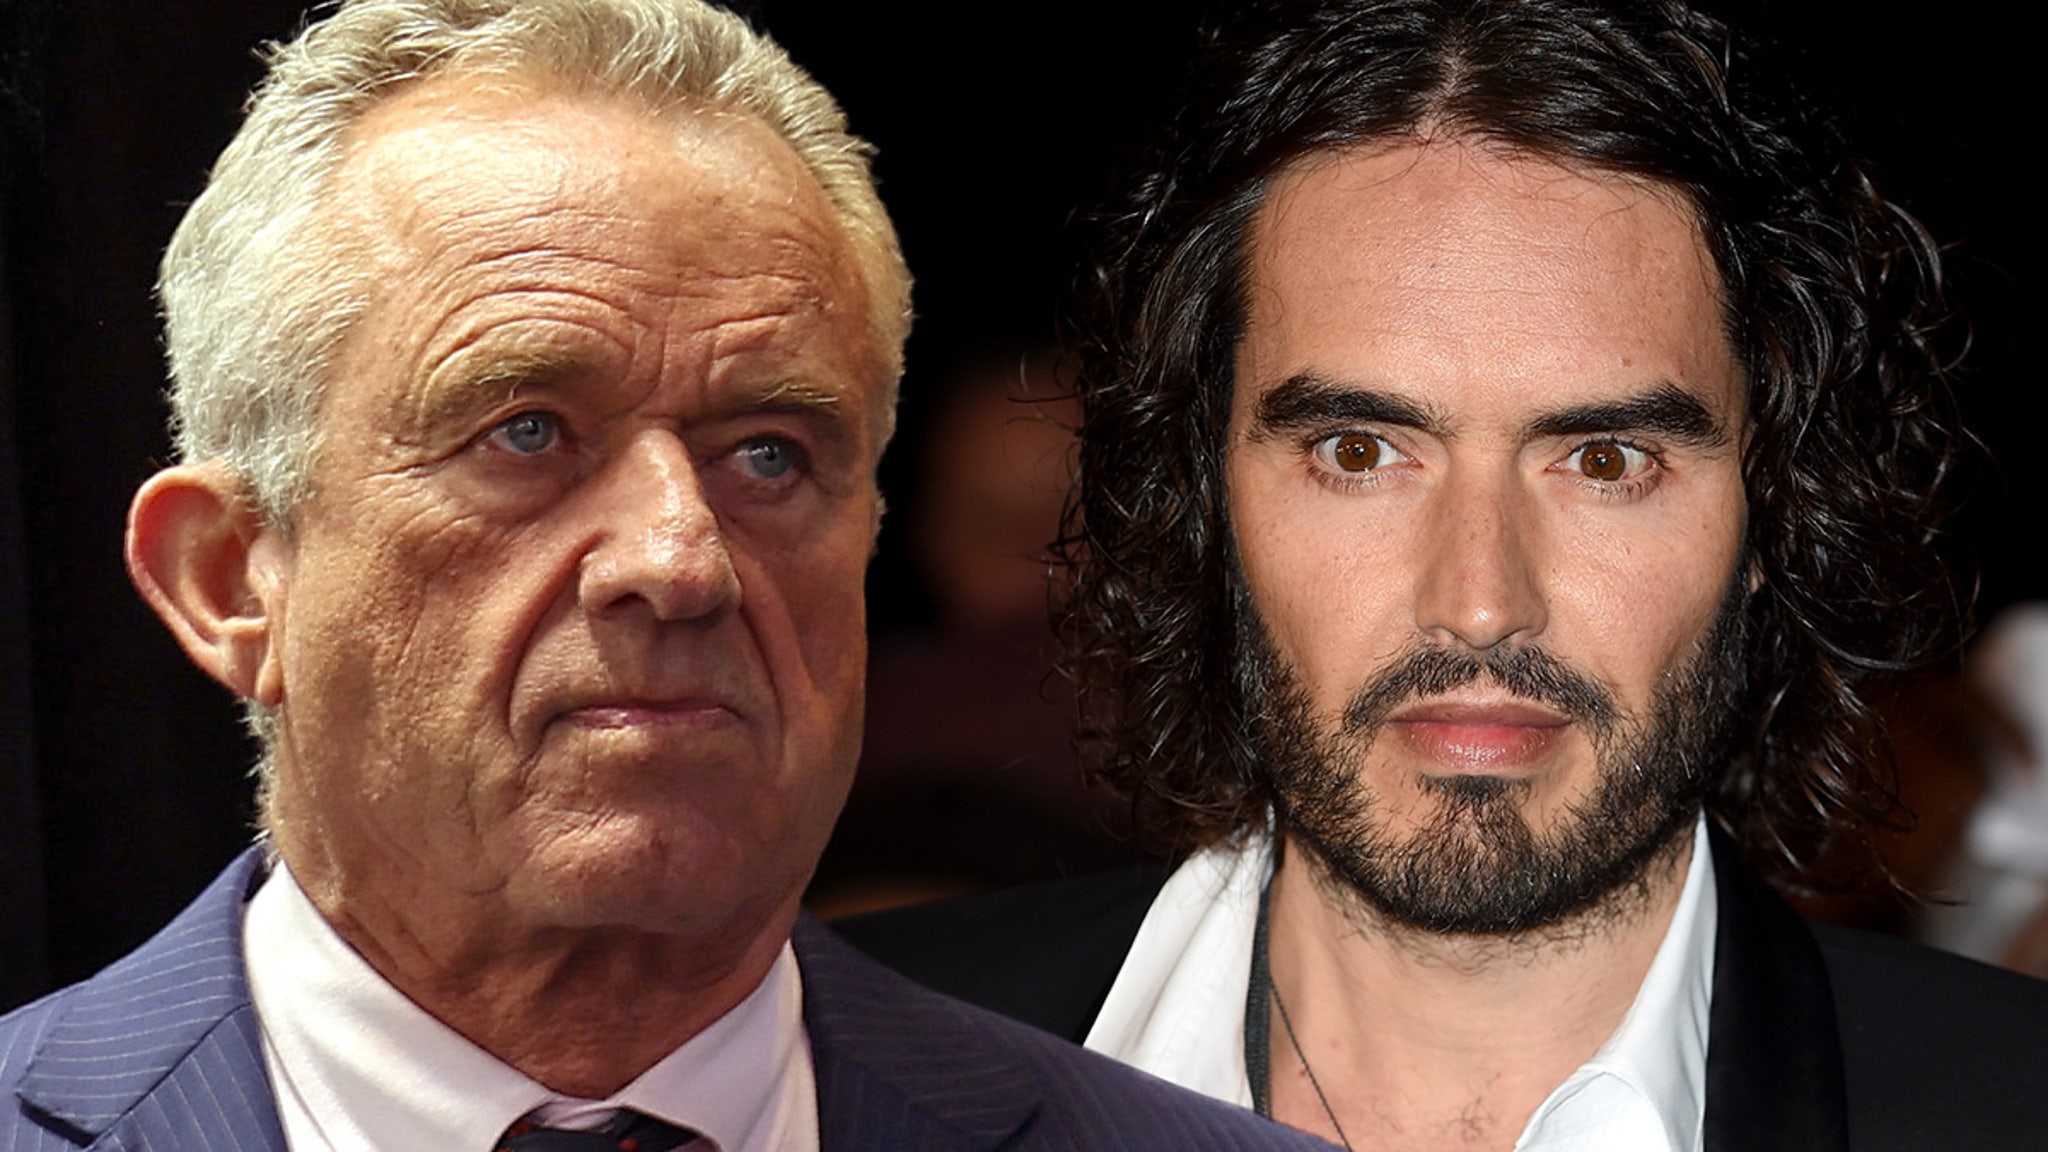 RFK Jr. Campaign Paid Russell Brand's Production Co. $68K for Appearance